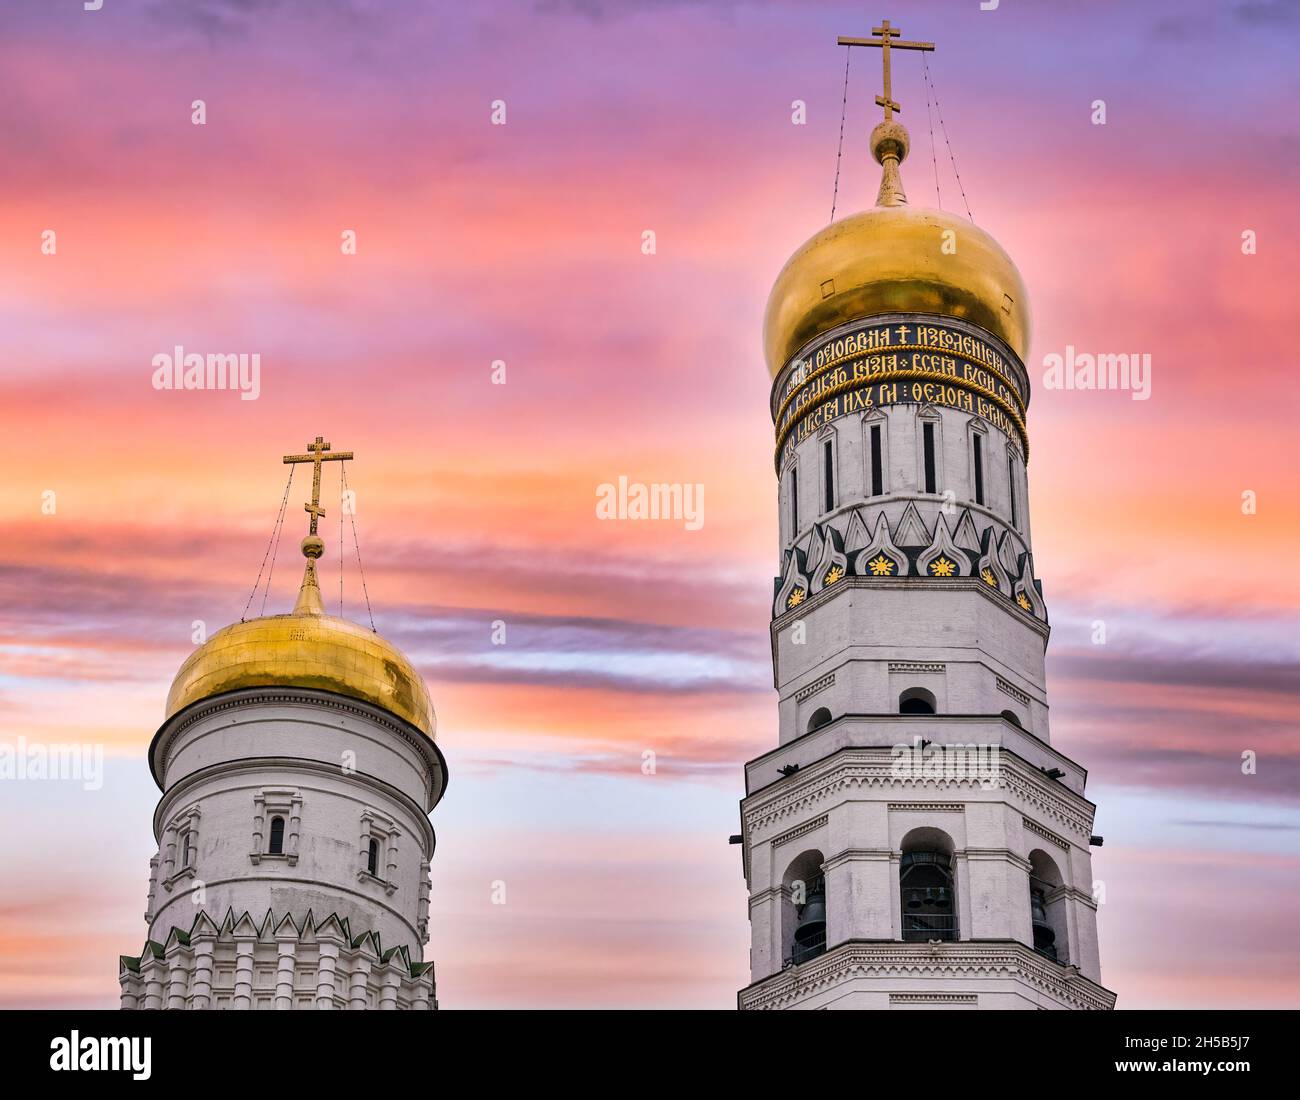 Gold onion domes of Ivan the Great Bell Tower & Dormition or Assumption Cathedral with colourful sky at sunset, Kremlin, Moscow, Russia Stock Photo